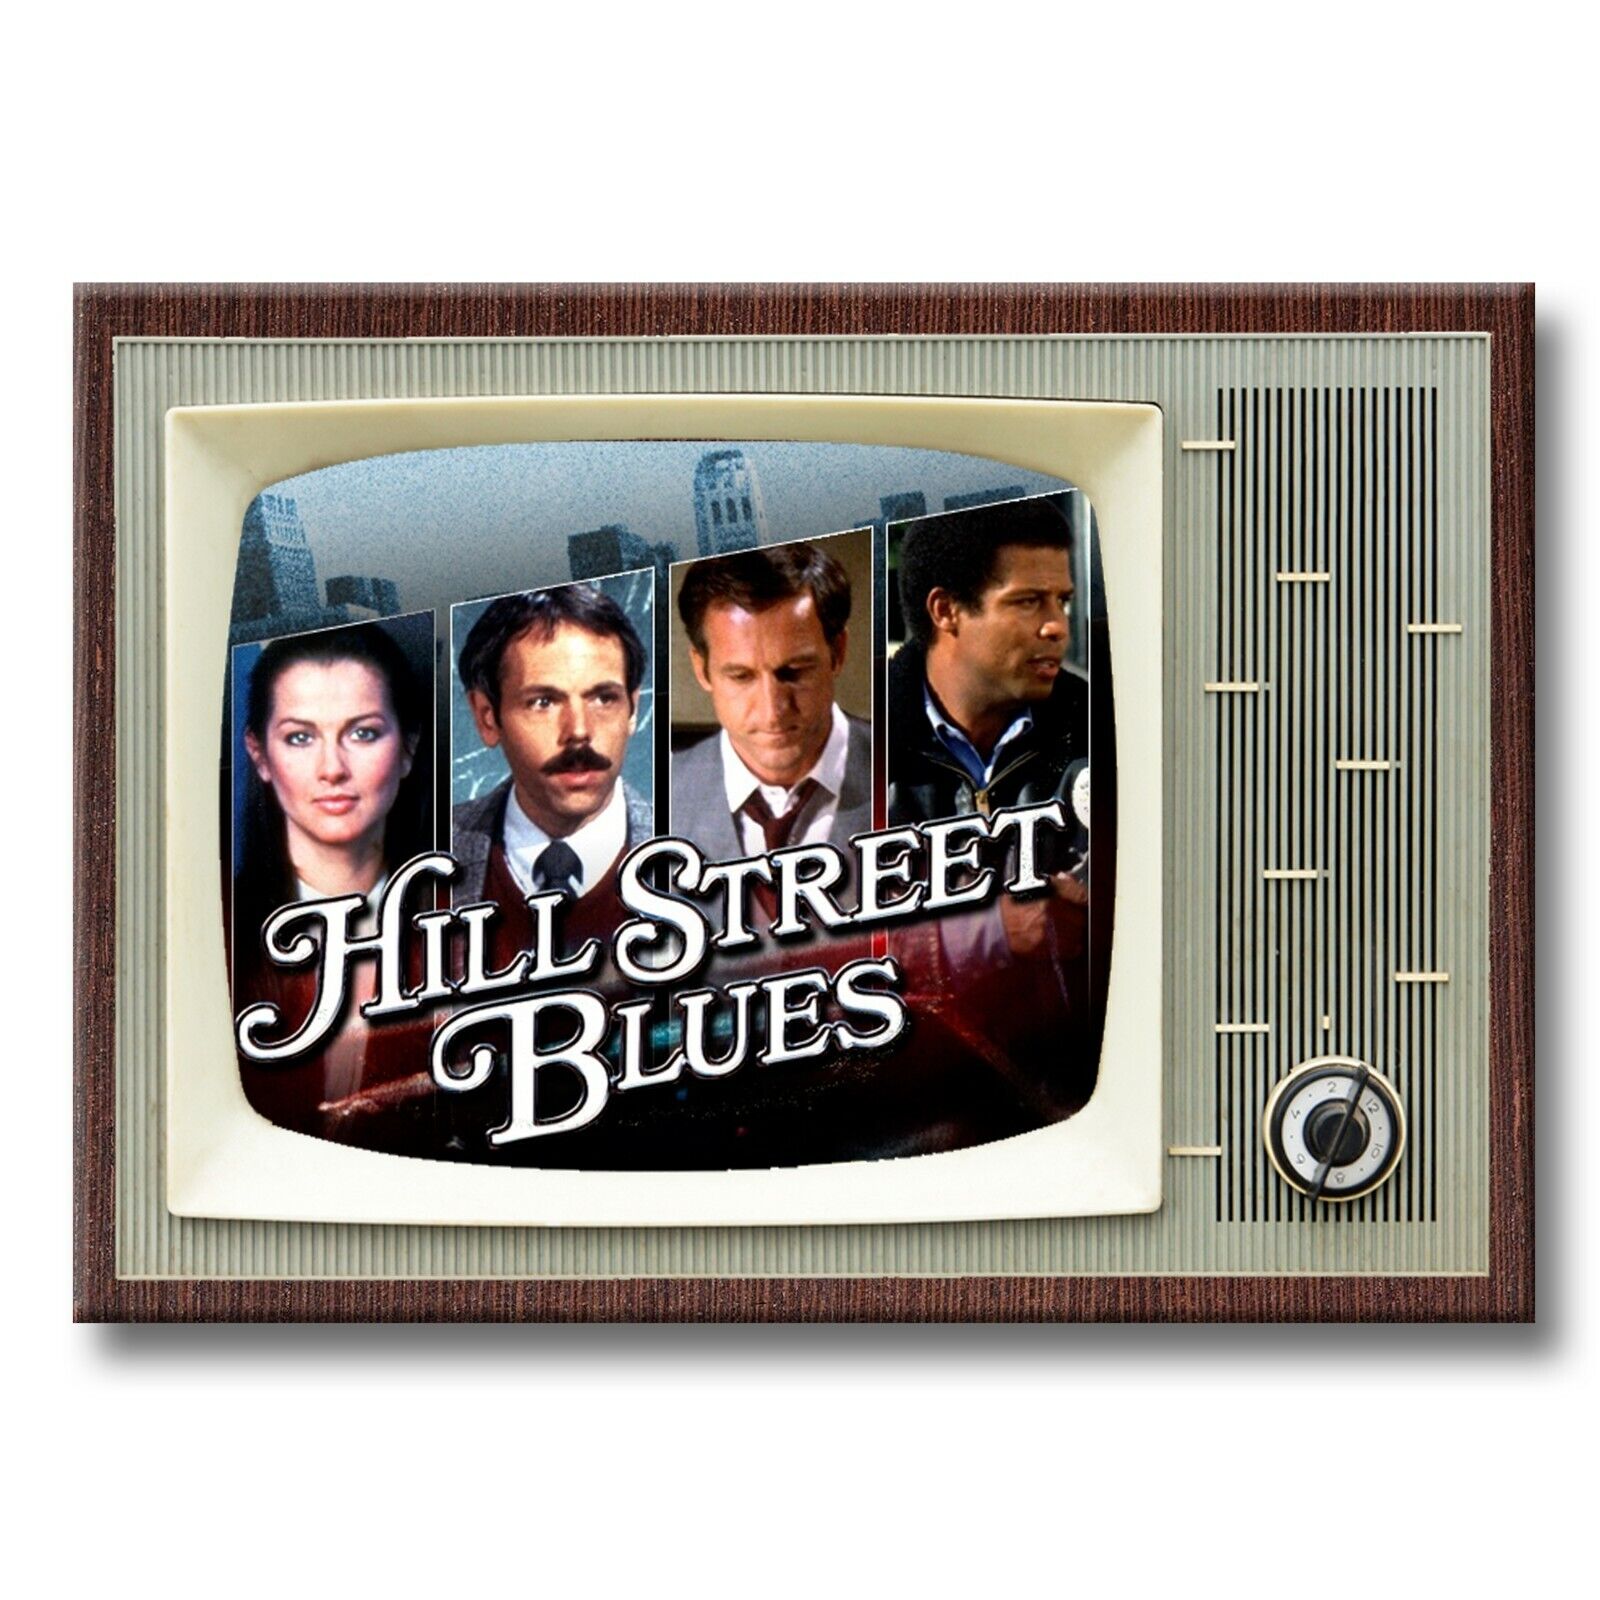 HILL STREET BLUES TV Show Classic TV 3.5 inches x 2.5 inches Steel FRIDGE MAGNET